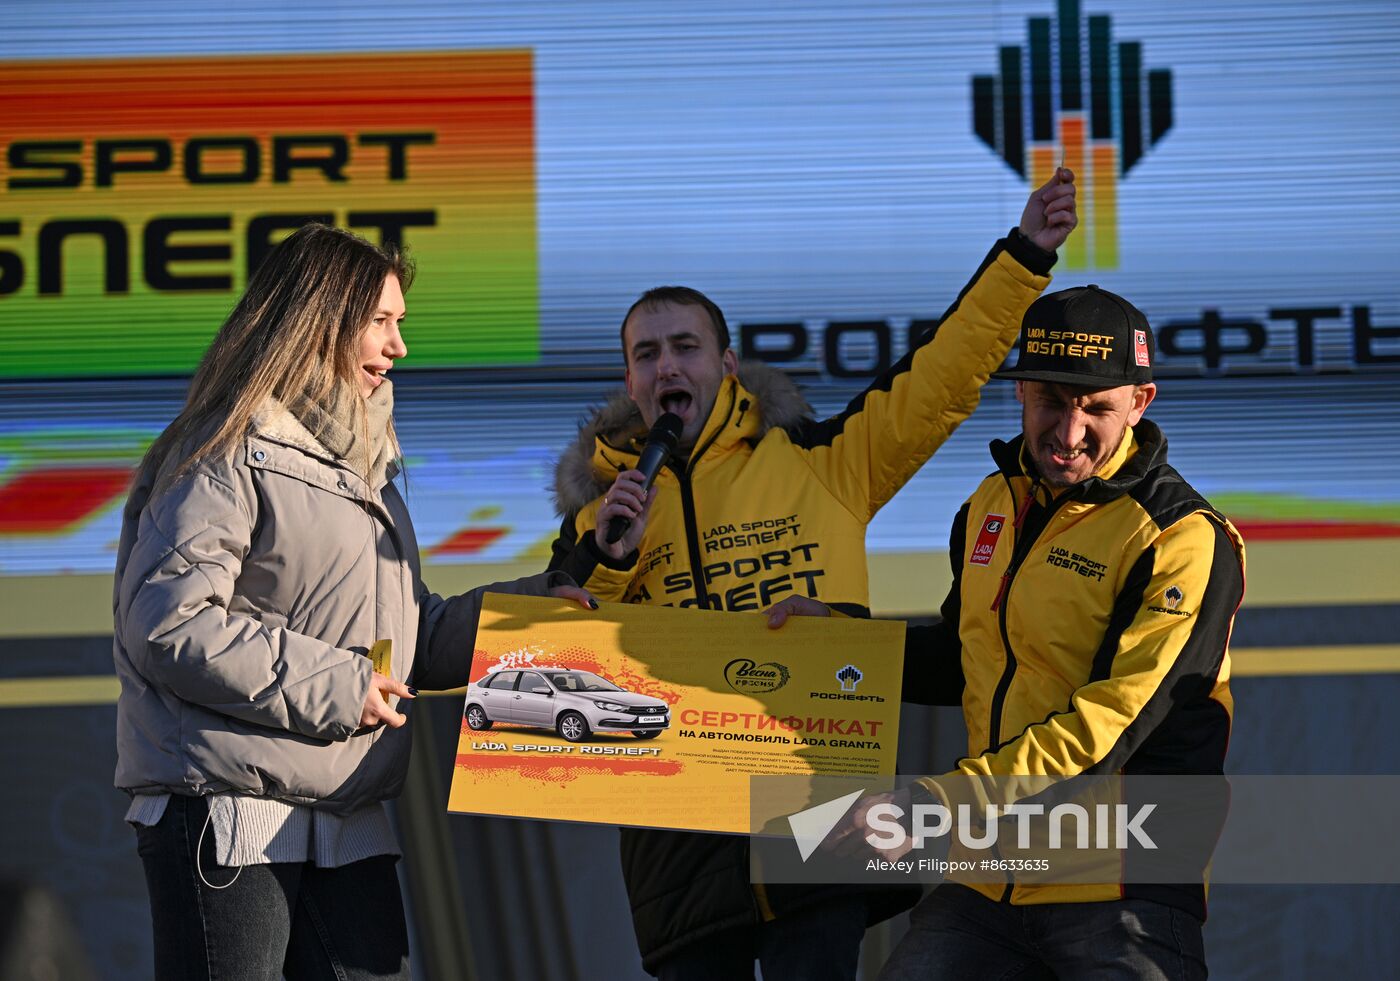 RUSSIA EXPO. Lada Granta Dream Car Lottery from Rosneft Co. and Lada Sport Rosneft Racing Team